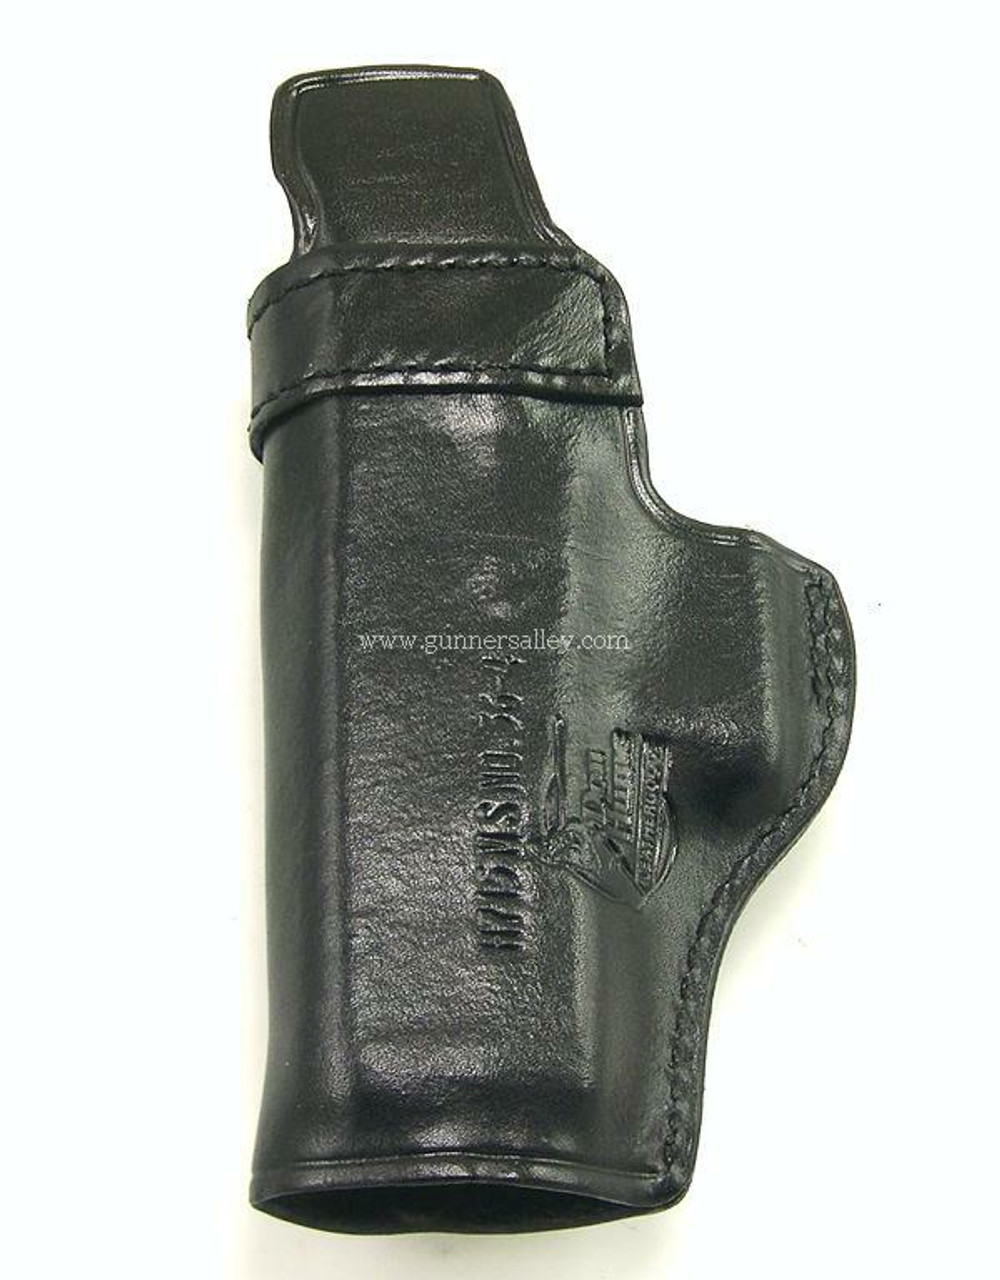 Rear View - Black - Right Hand - Shown for a Glock 19 for Demonstration Purposes